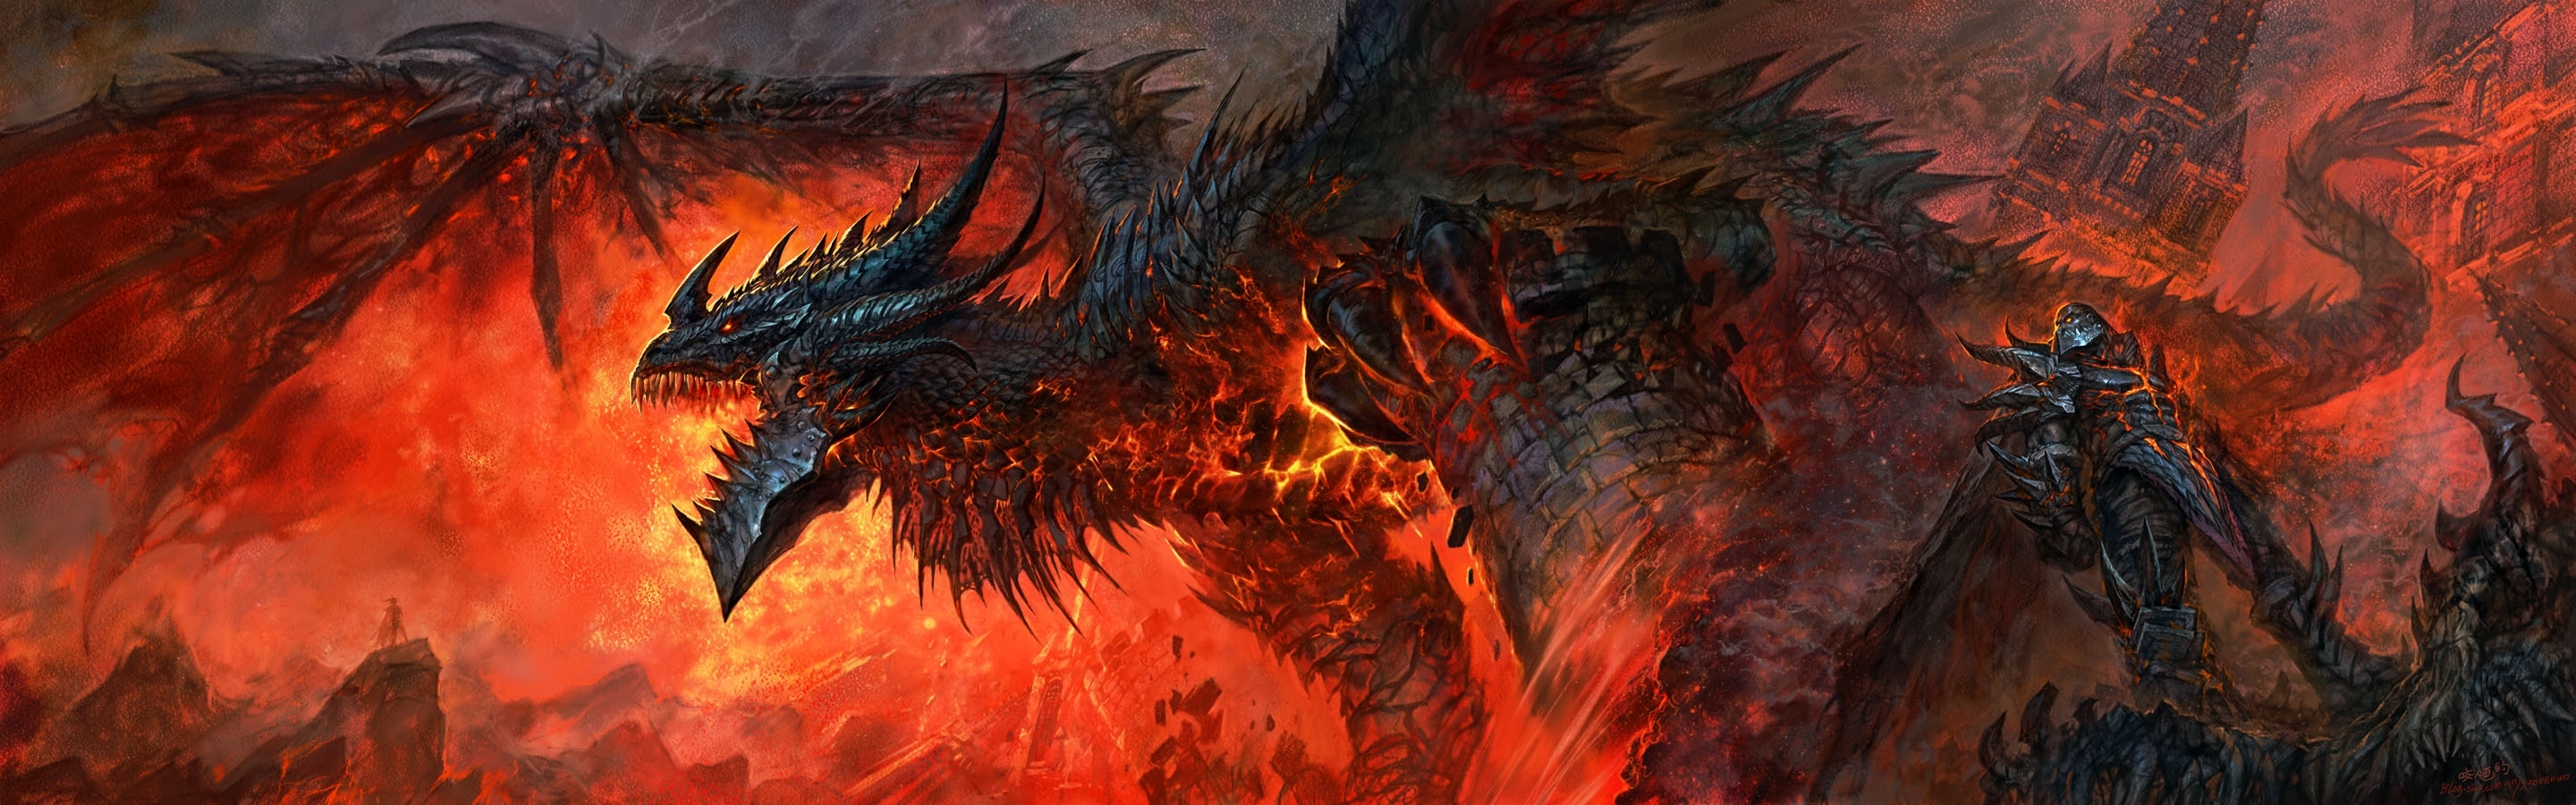 Dragon Wallpaper And Background Image Id